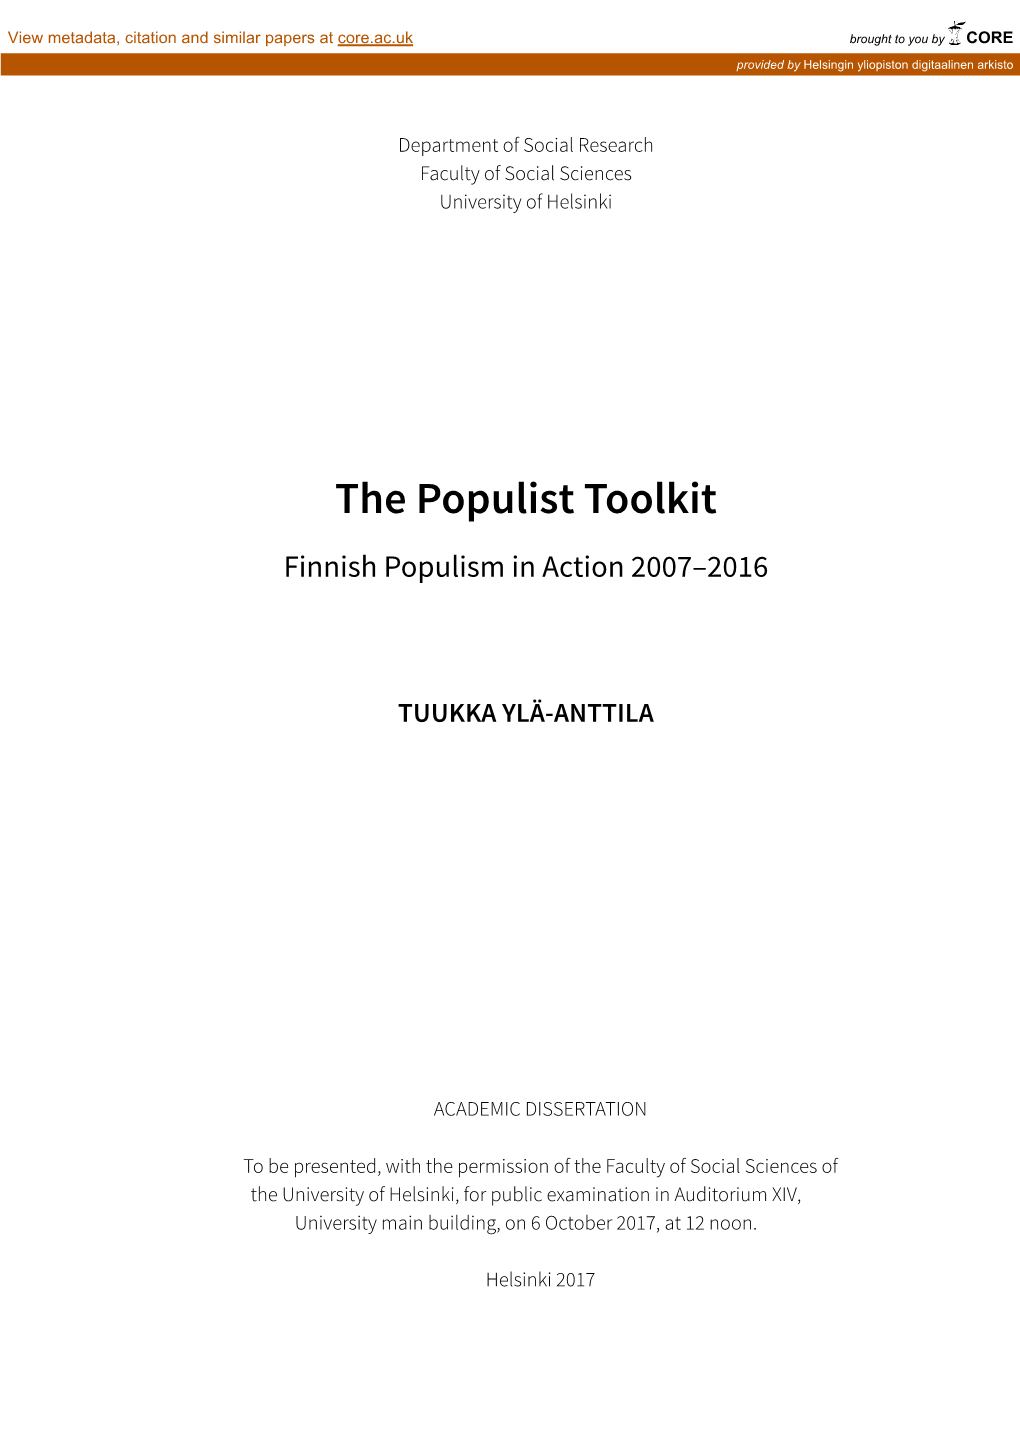 The Populist Toolkit; Finnish Populism in Action 2007–2016